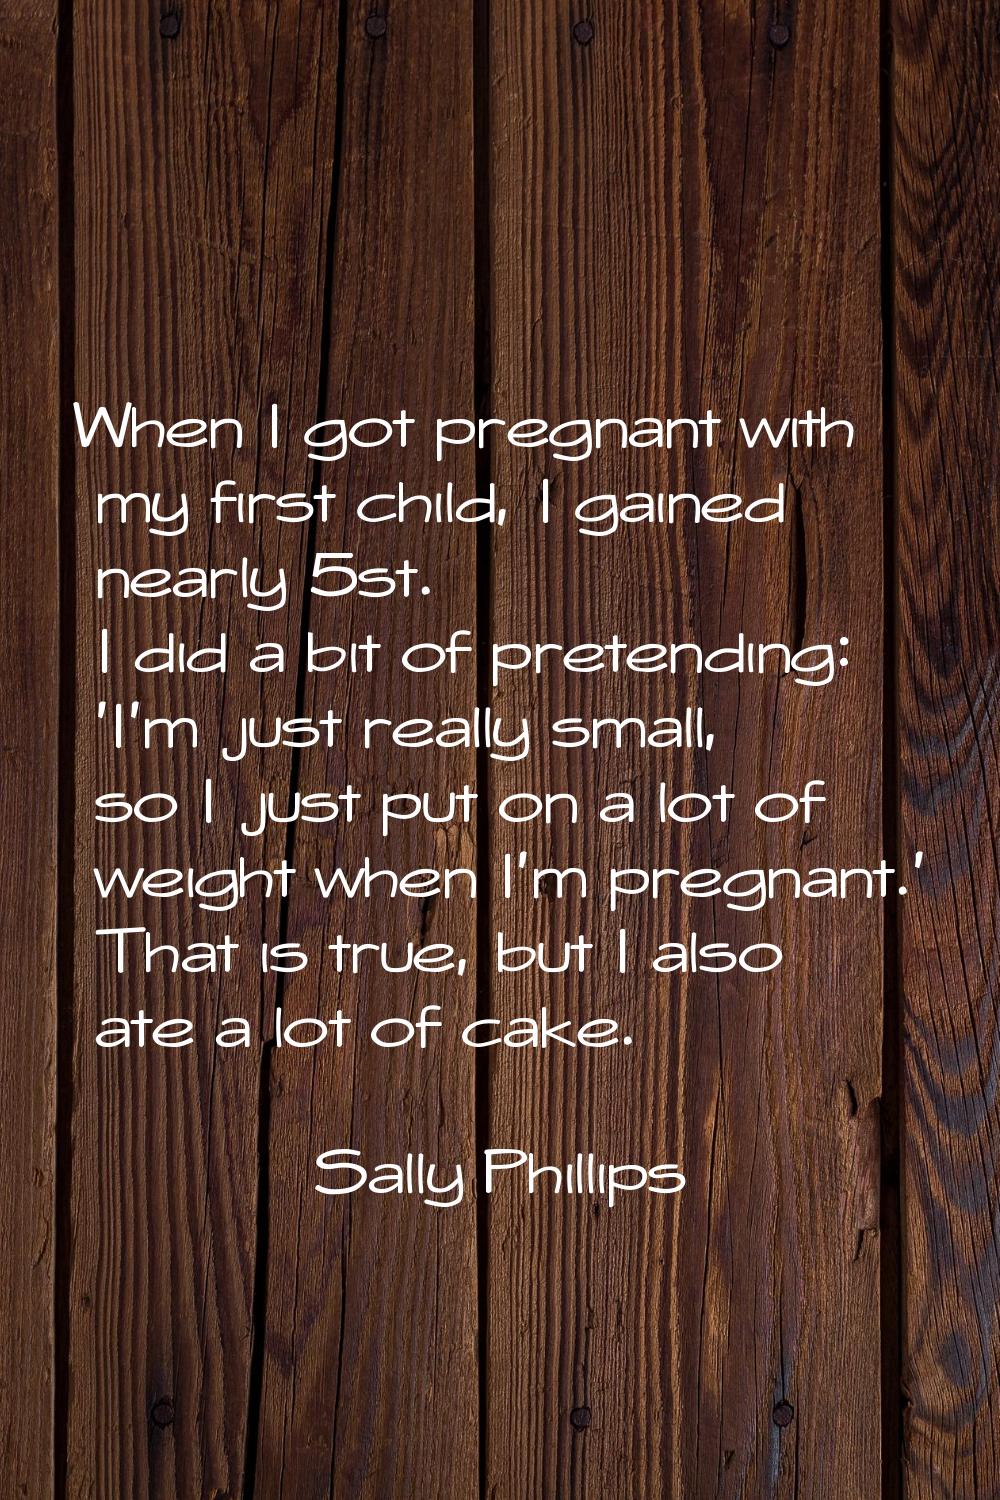 When I got pregnant with my first child, I gained nearly 5st. I did a bit of pretending: 'I'm just 